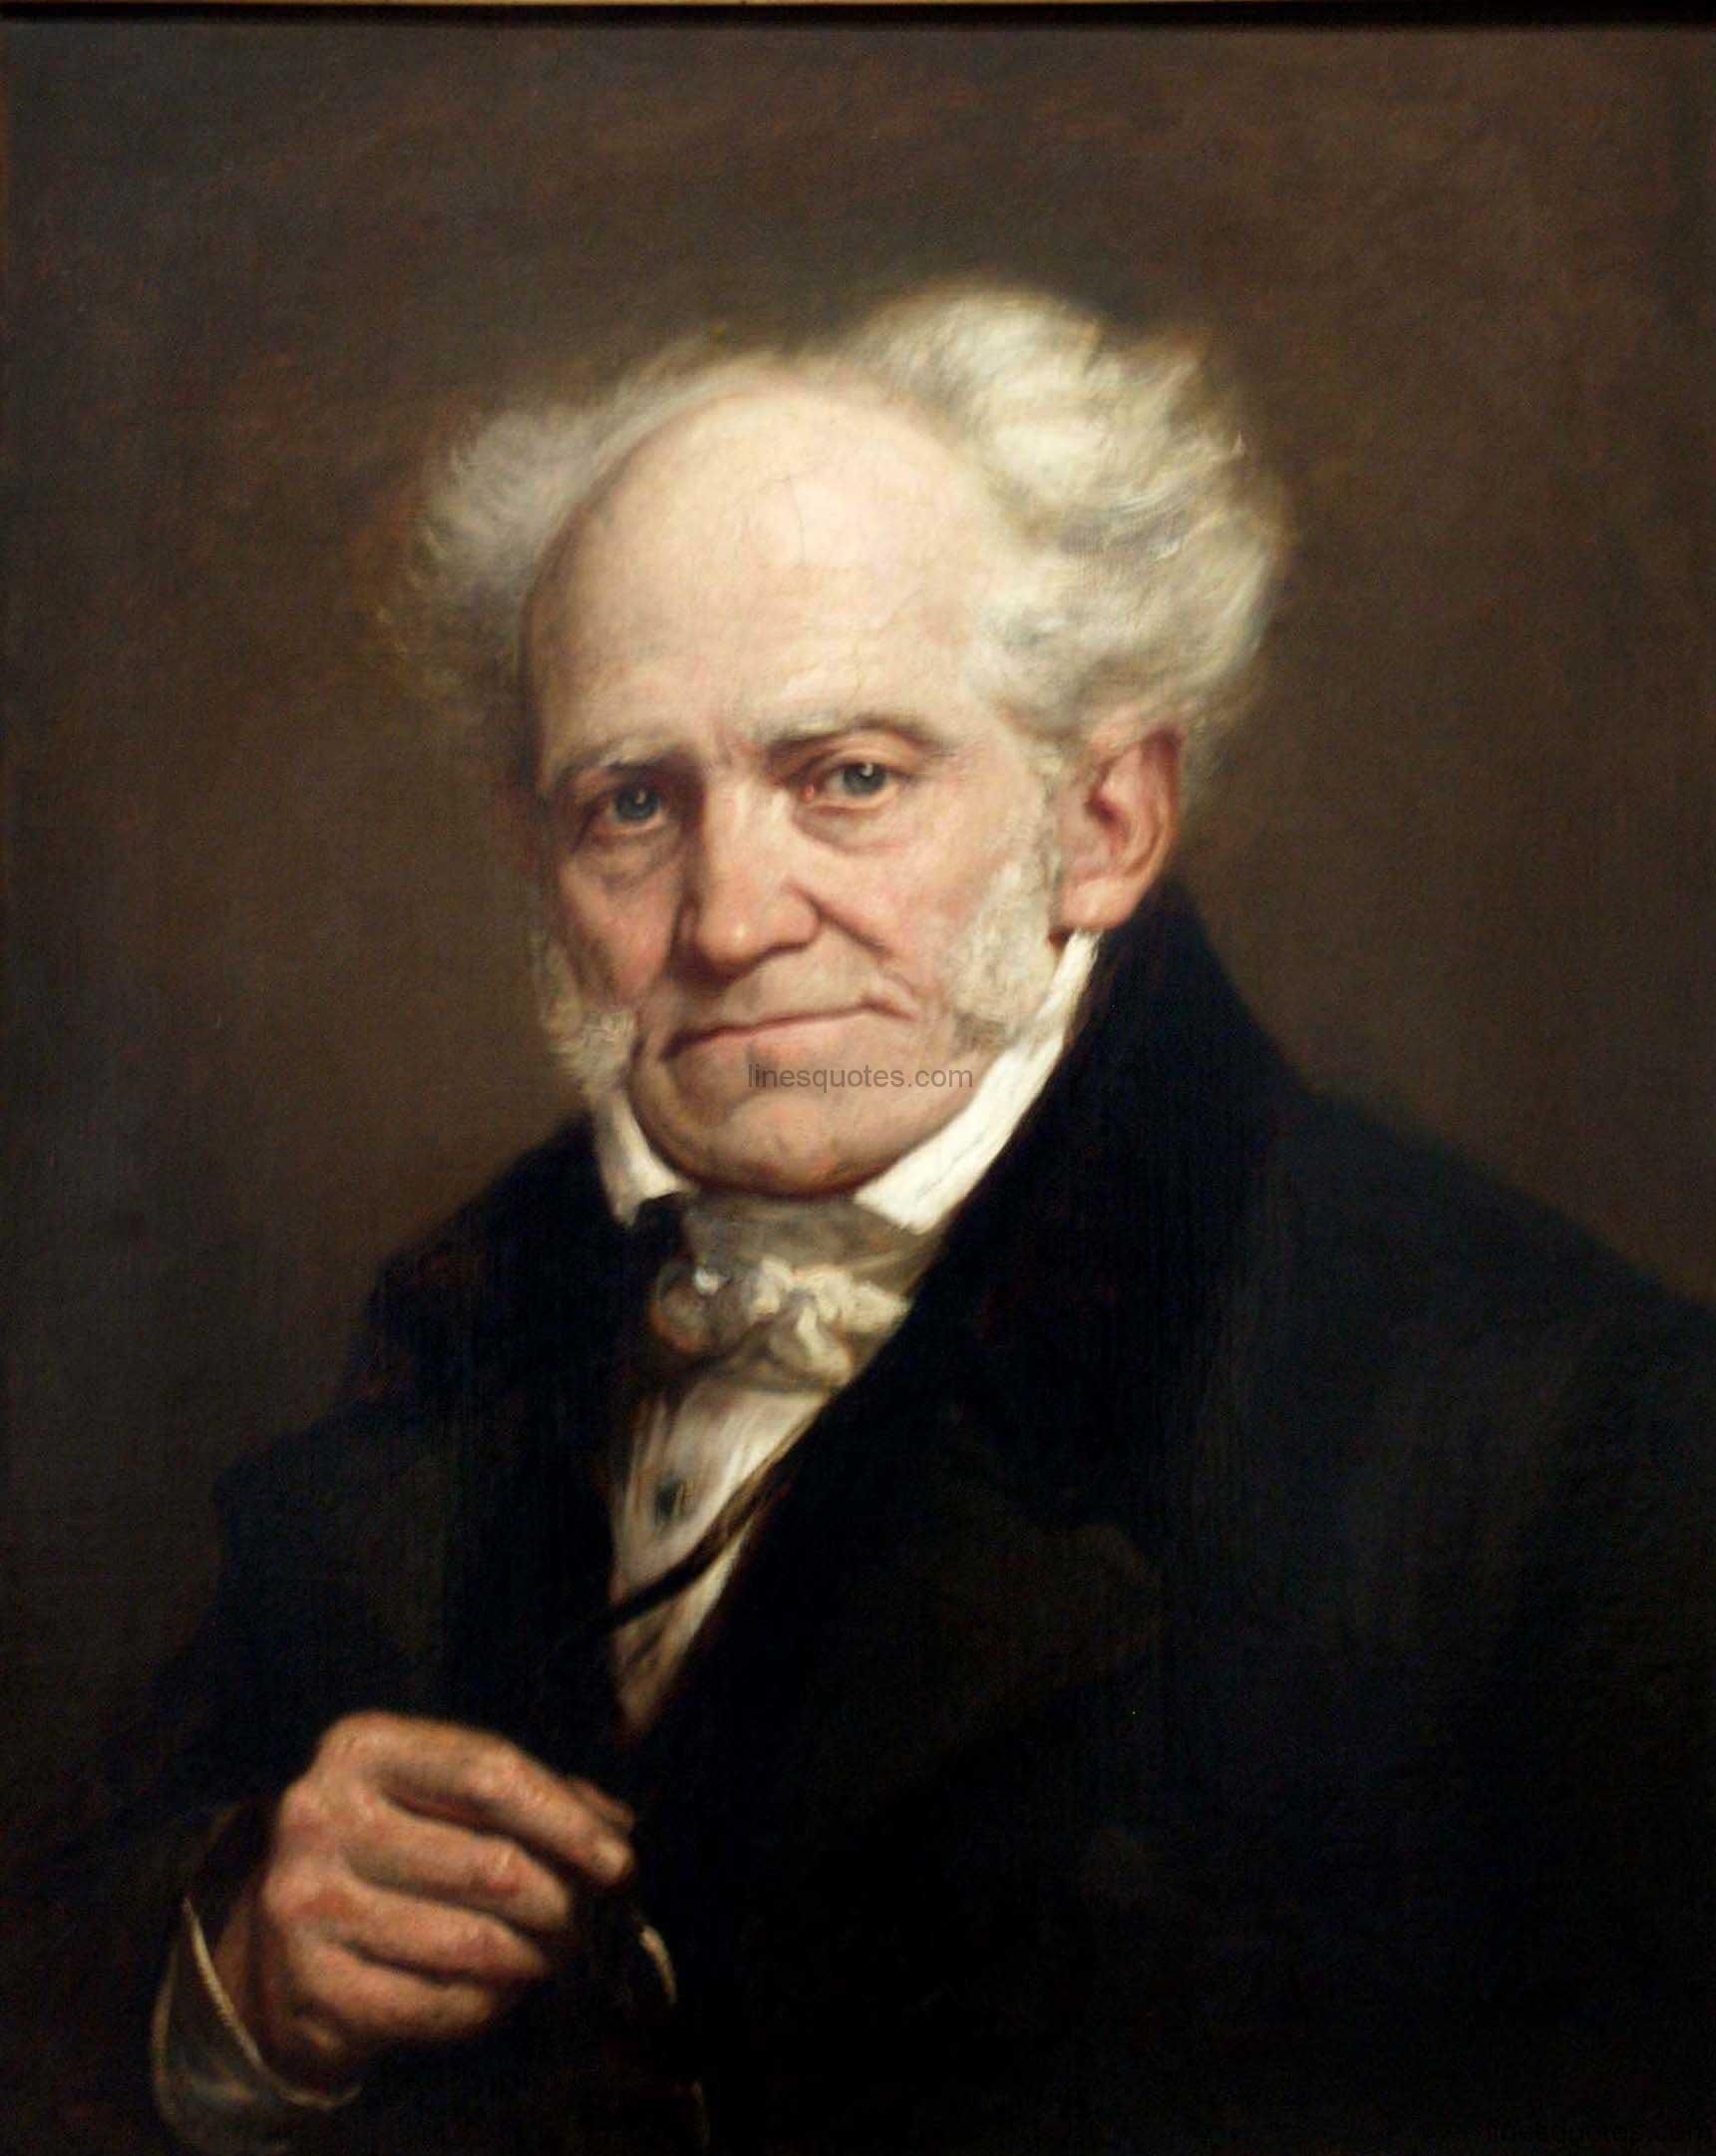 Arthur Schopenhauer Quotes And Sayings (With Image)